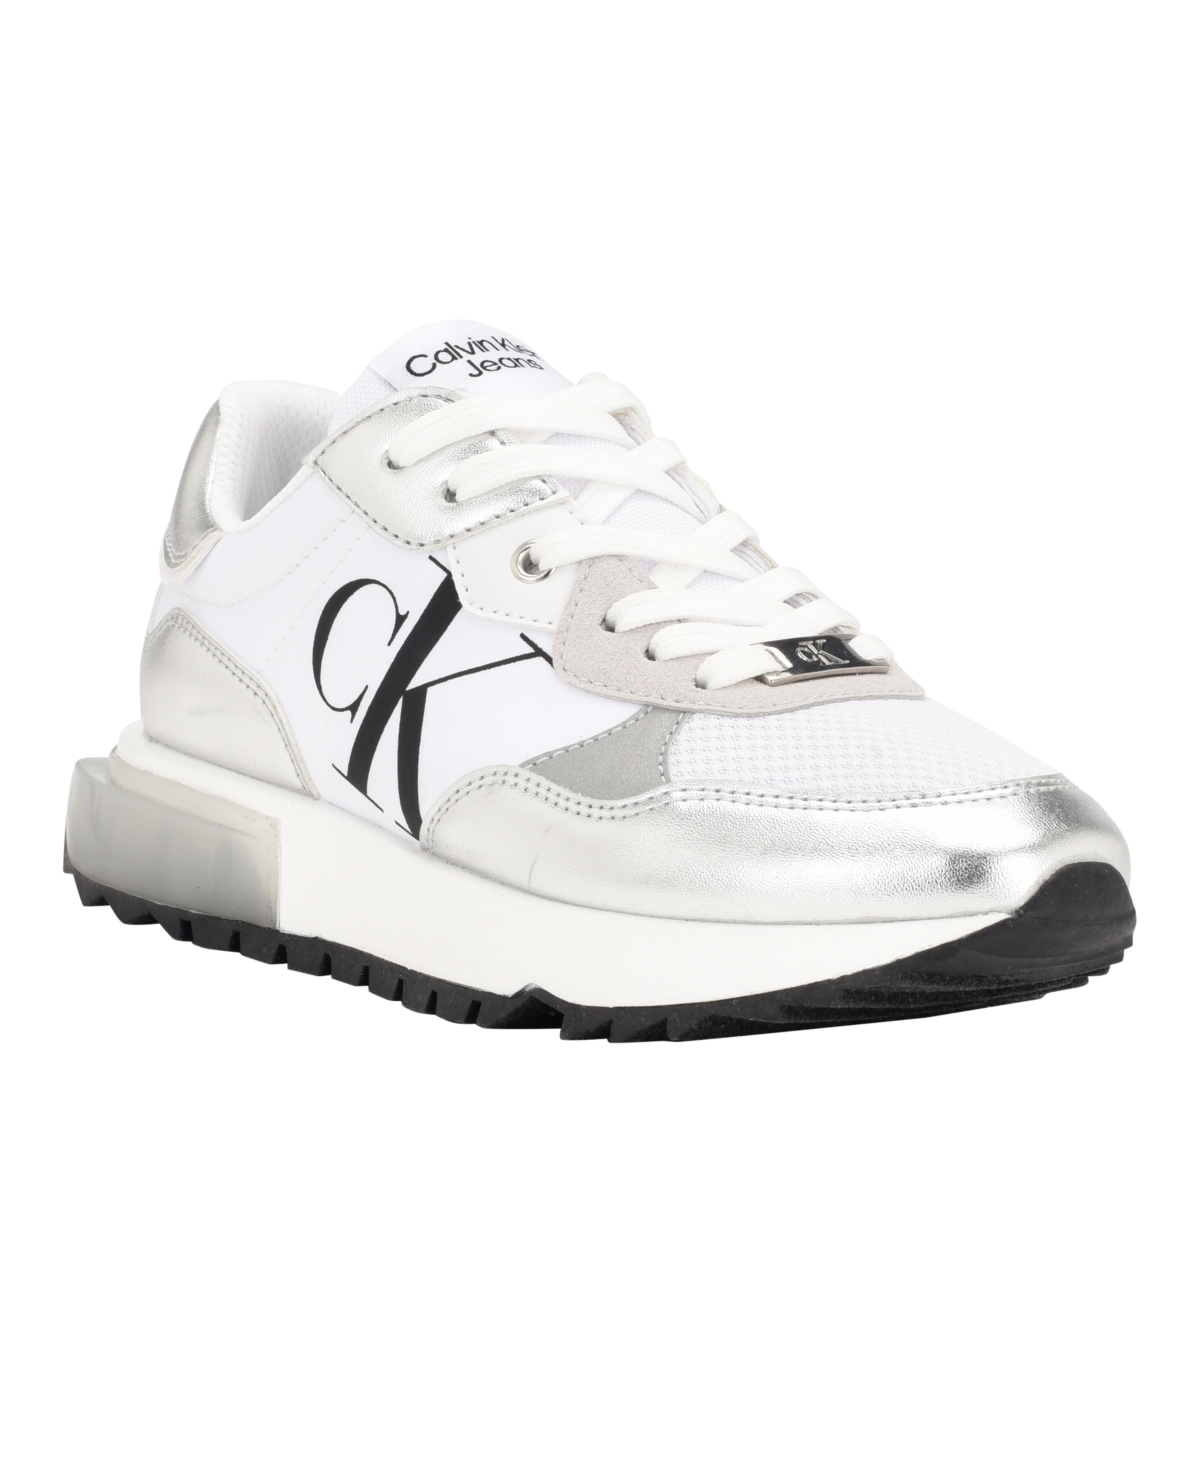 Calvin Klein Shoes (600+ products) find prices here »